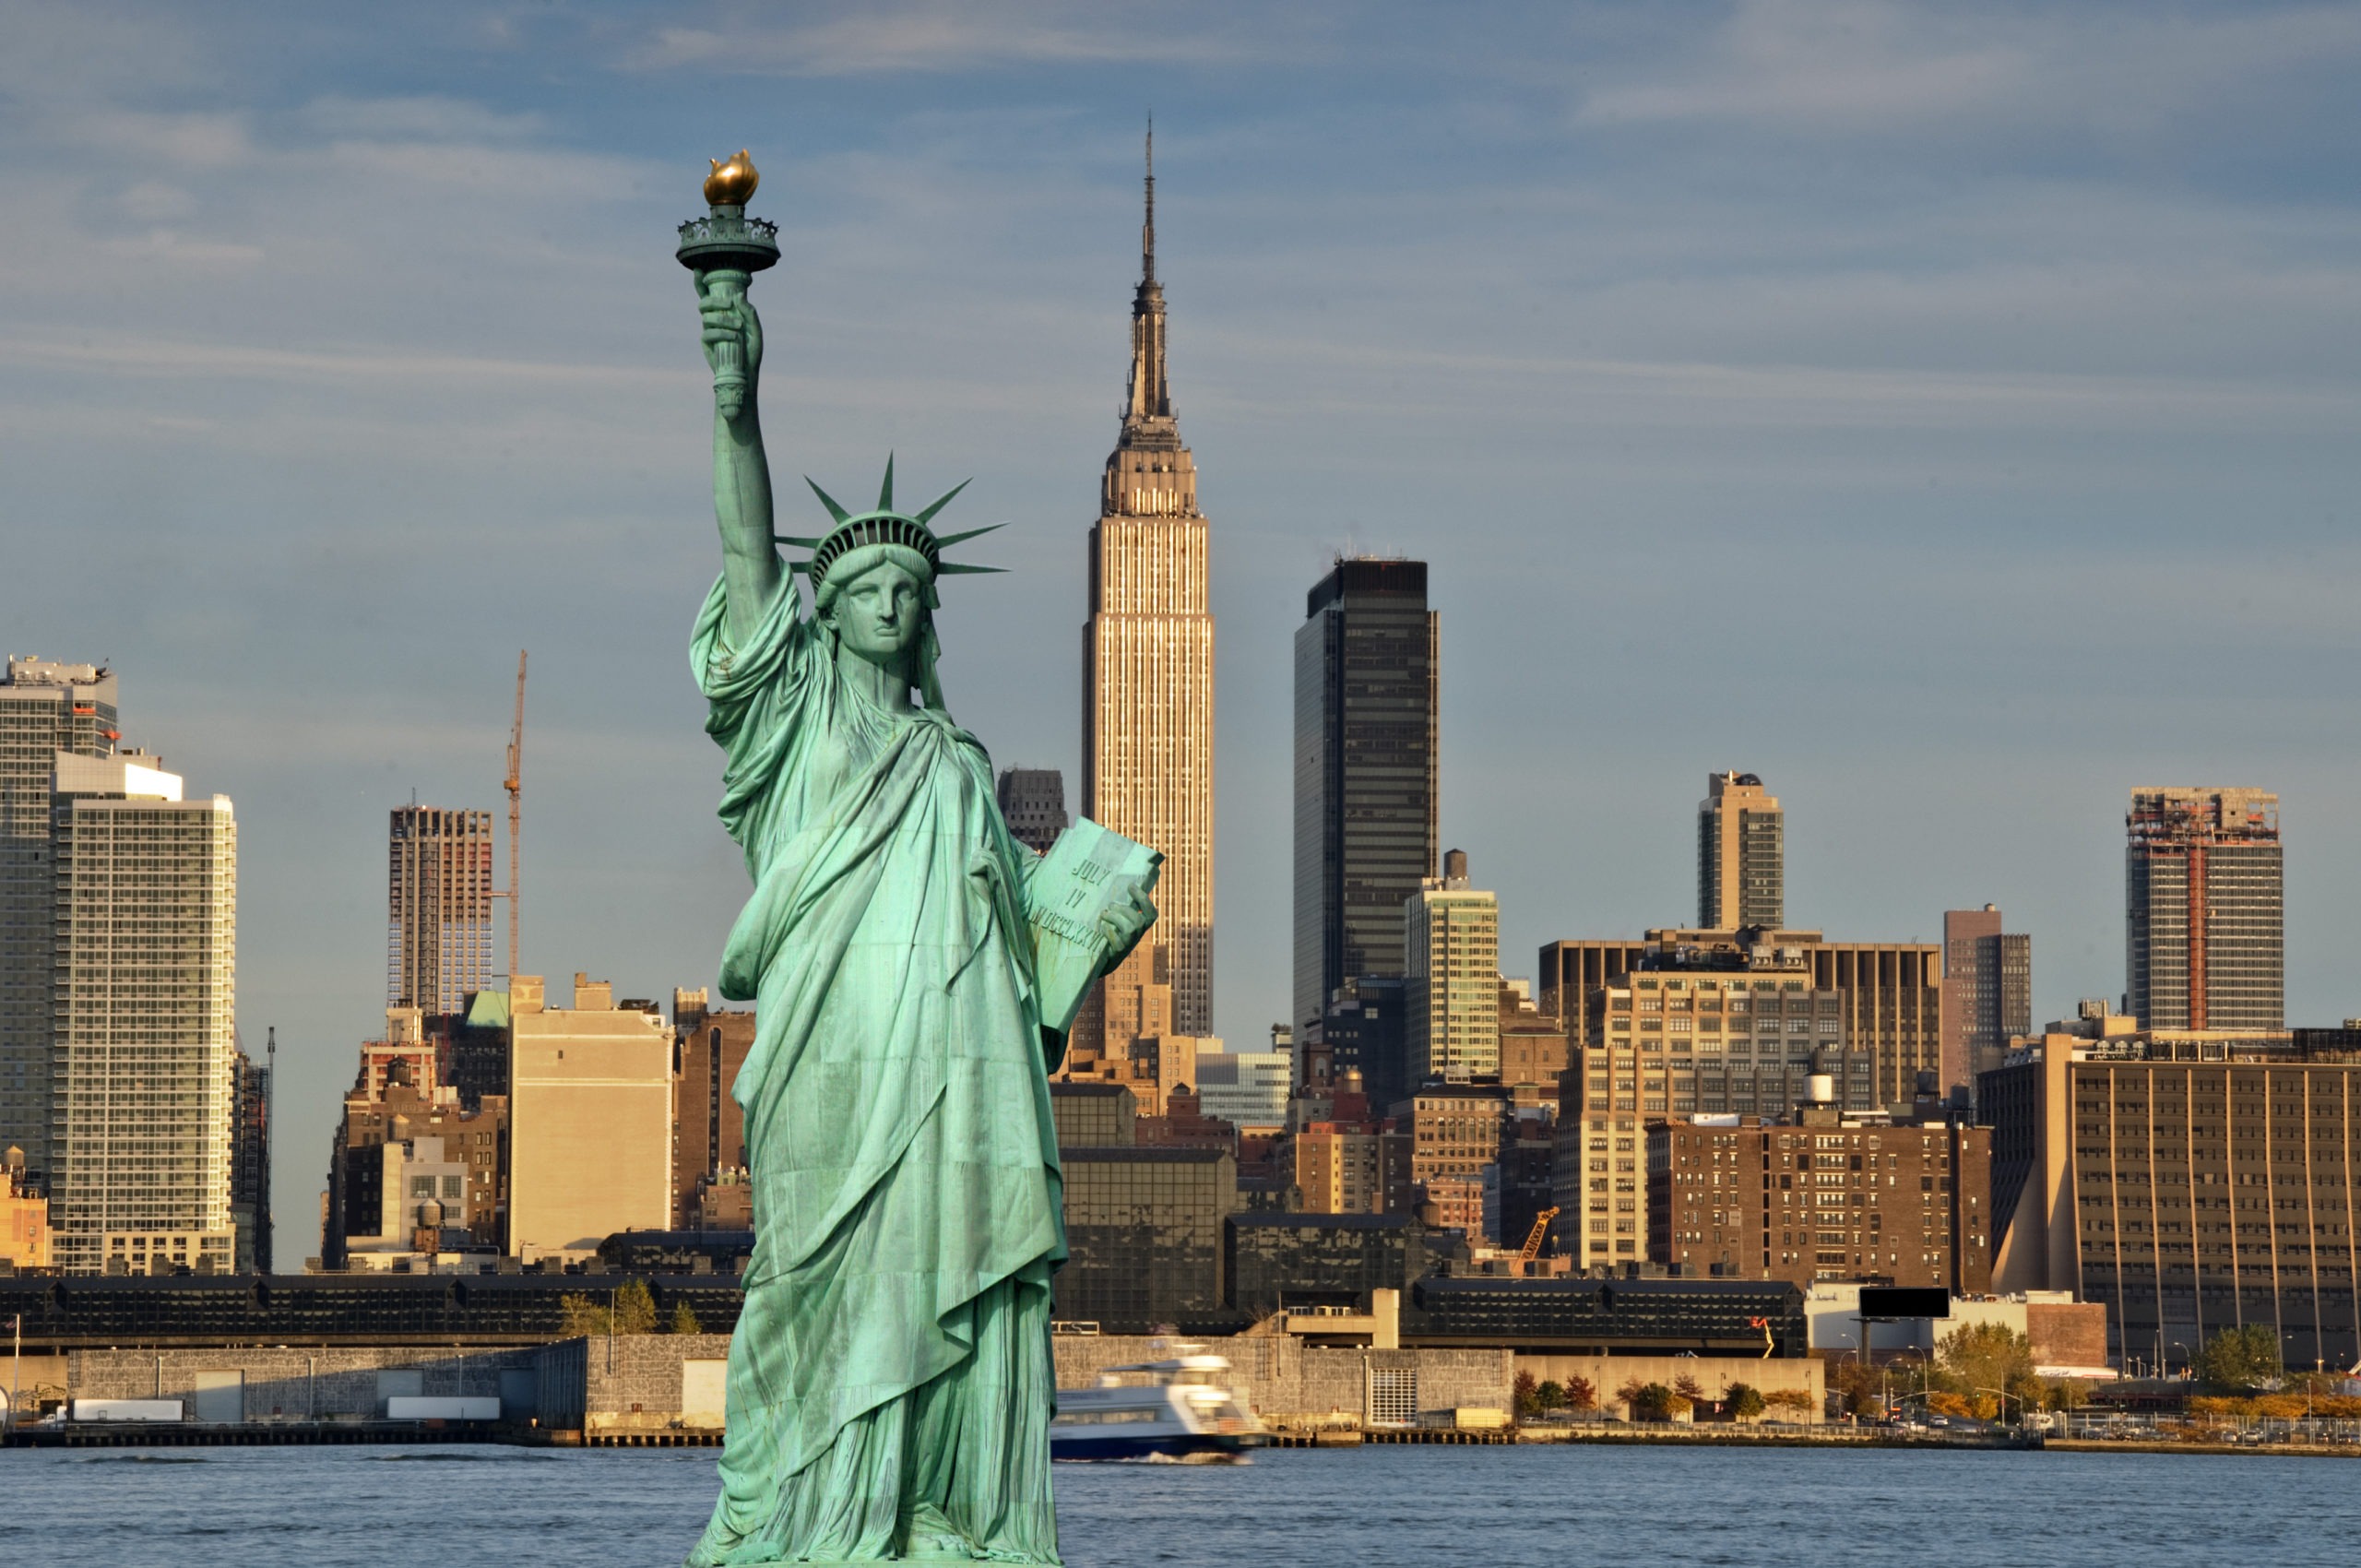 The Statue of Liberty and Empire State Building